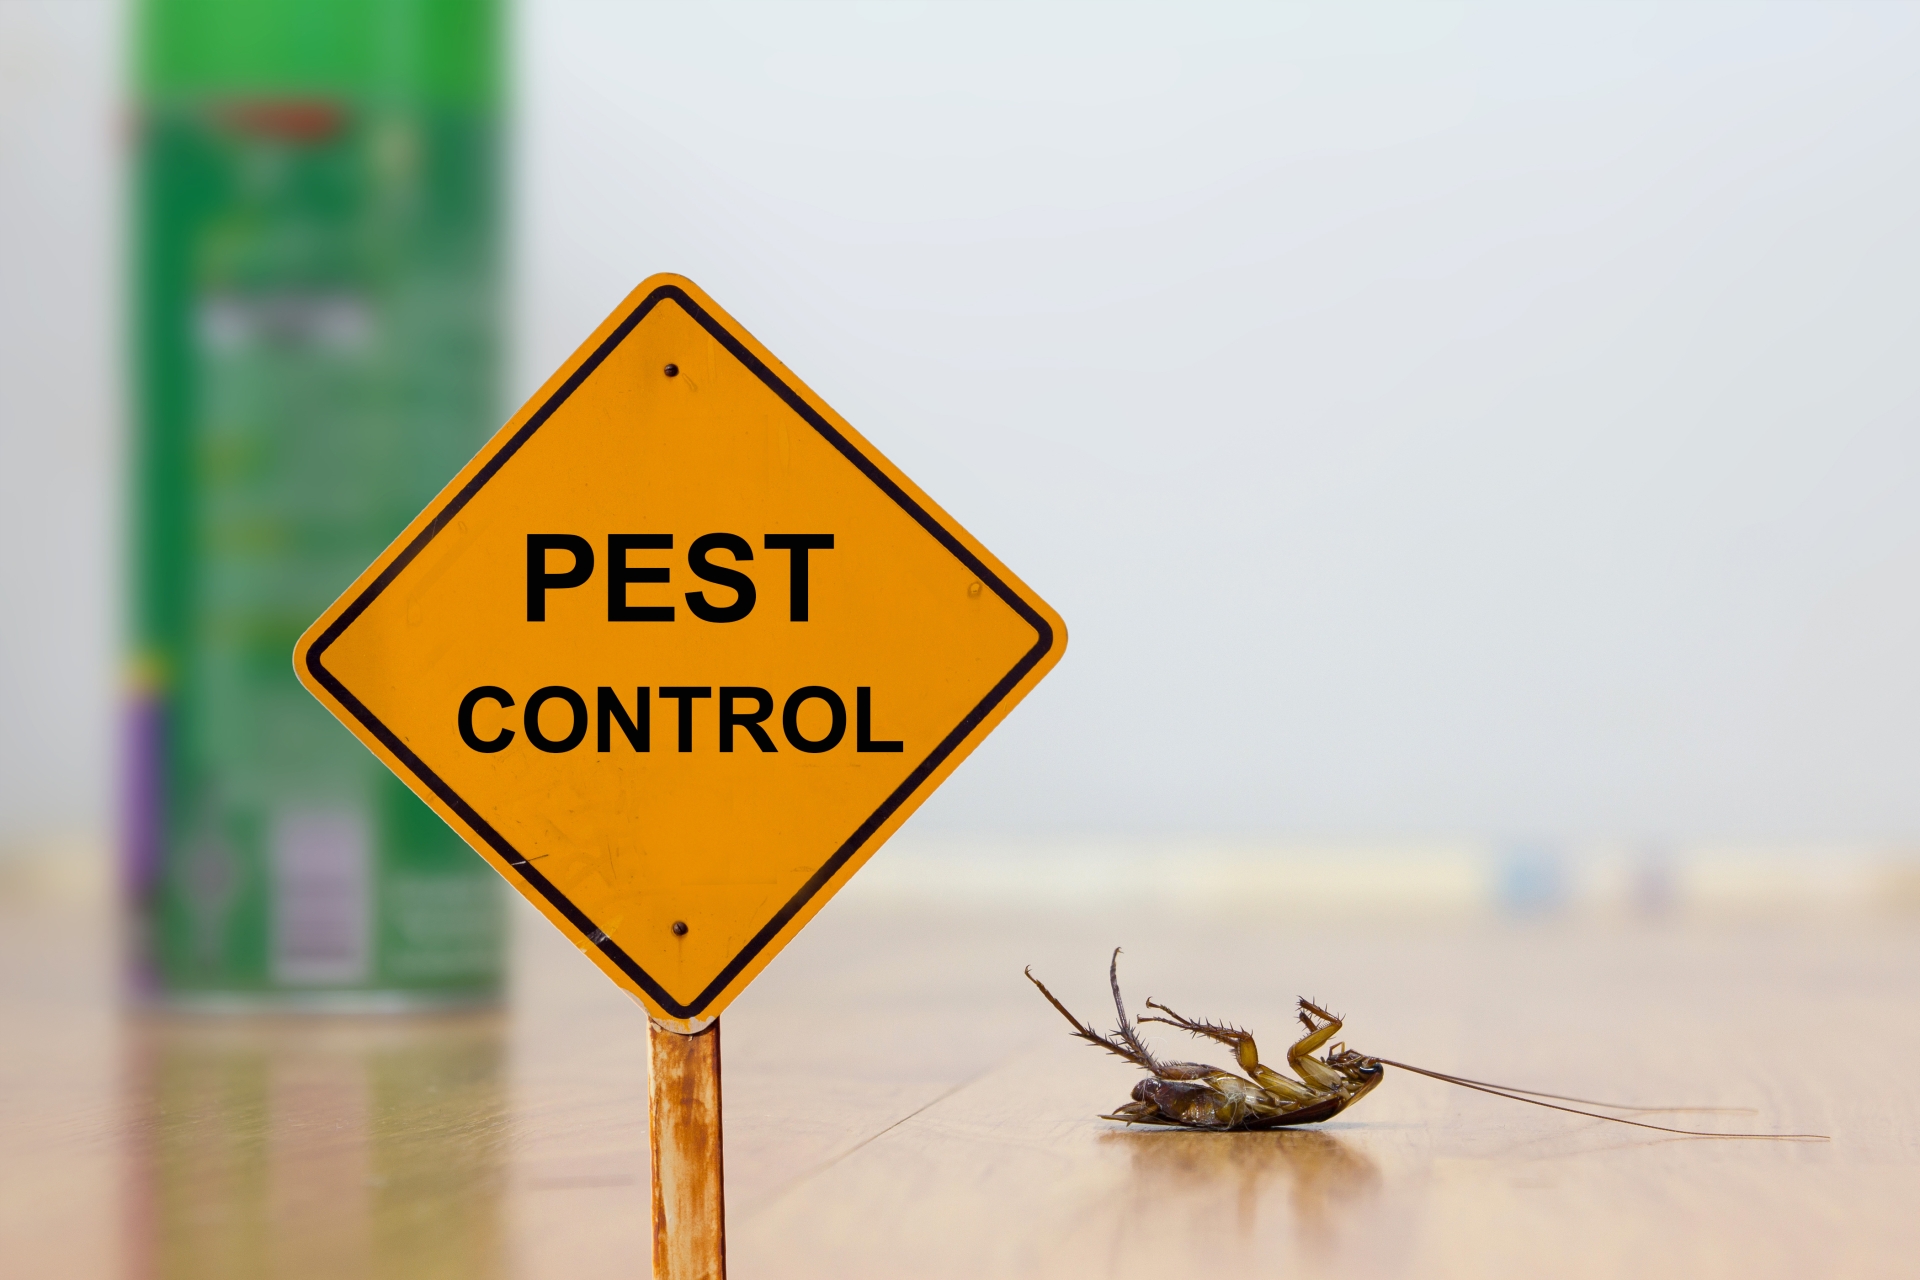 24 Hour Pest Control, Pest Control in Warlingham, Chelsham, CR6. Call Now 020 8166 9746